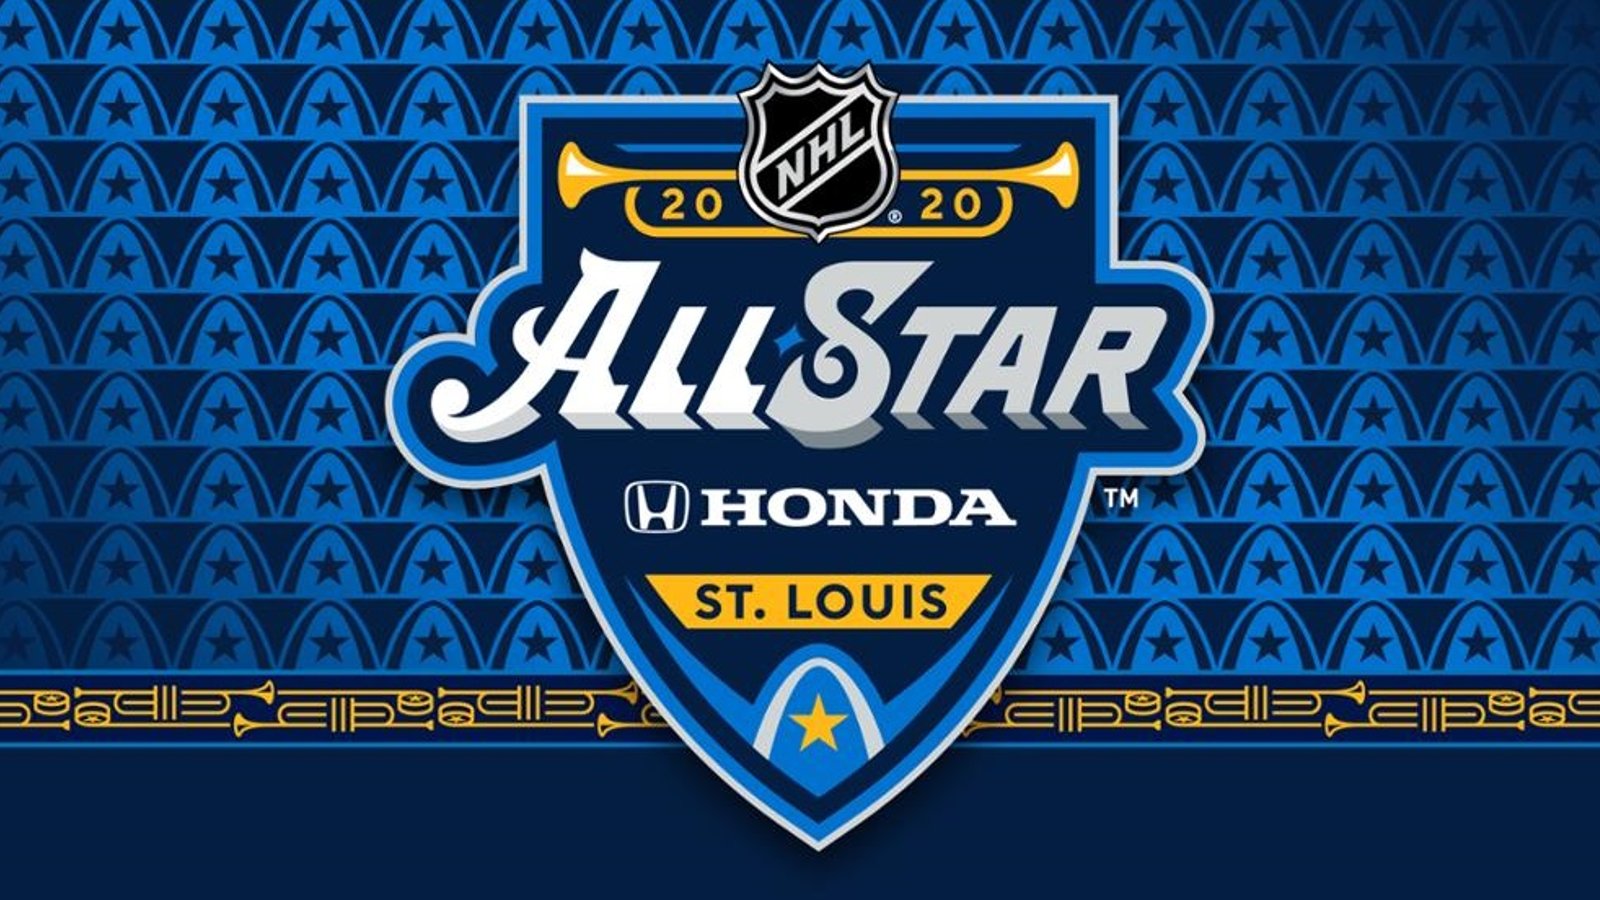 NHL All Star selections have been announced!